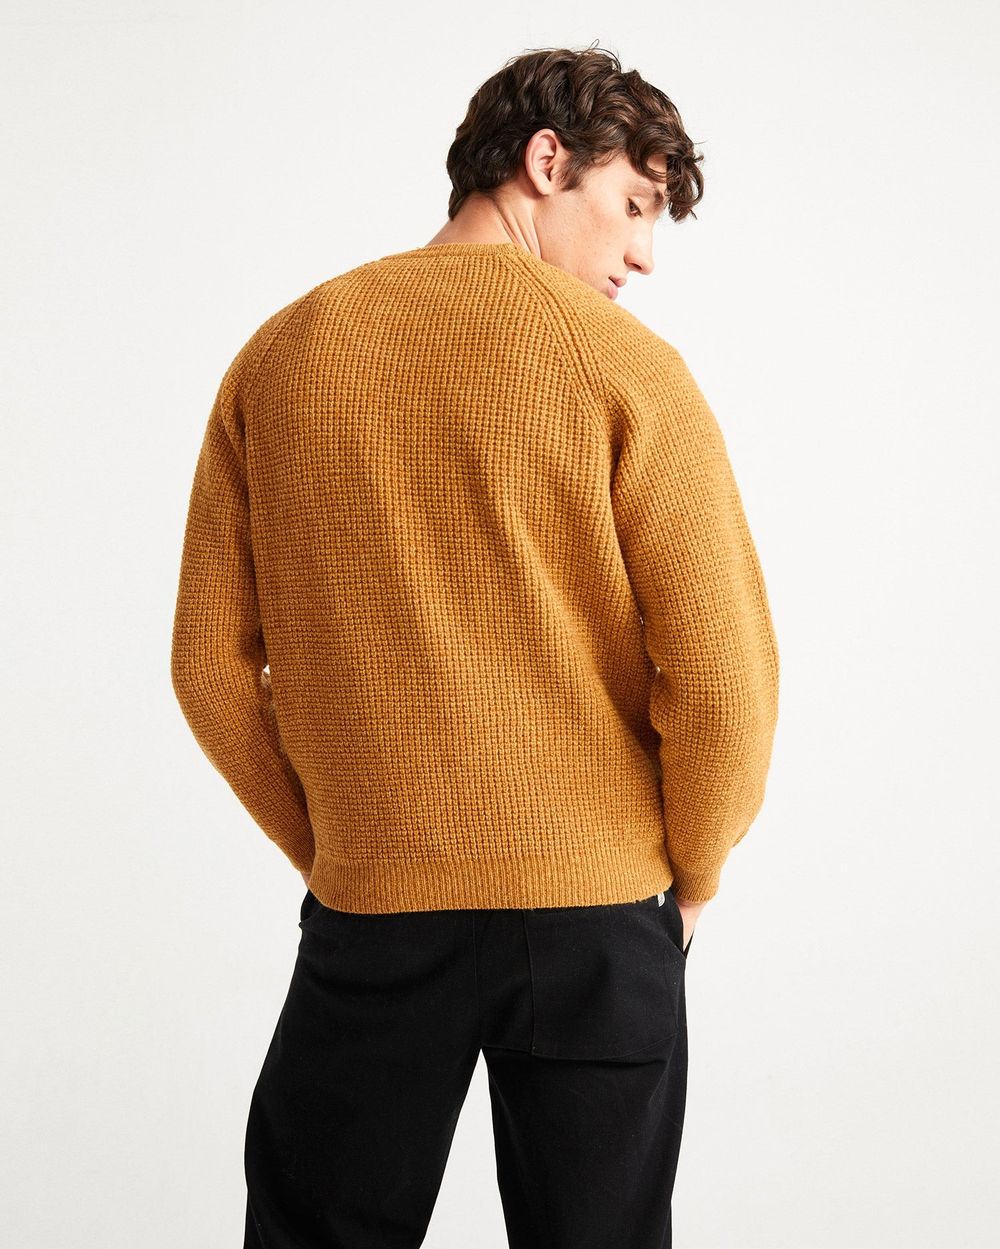 Pulls Homme  Faconnable Pull Col Rond En Laine Mérinos Jaffa